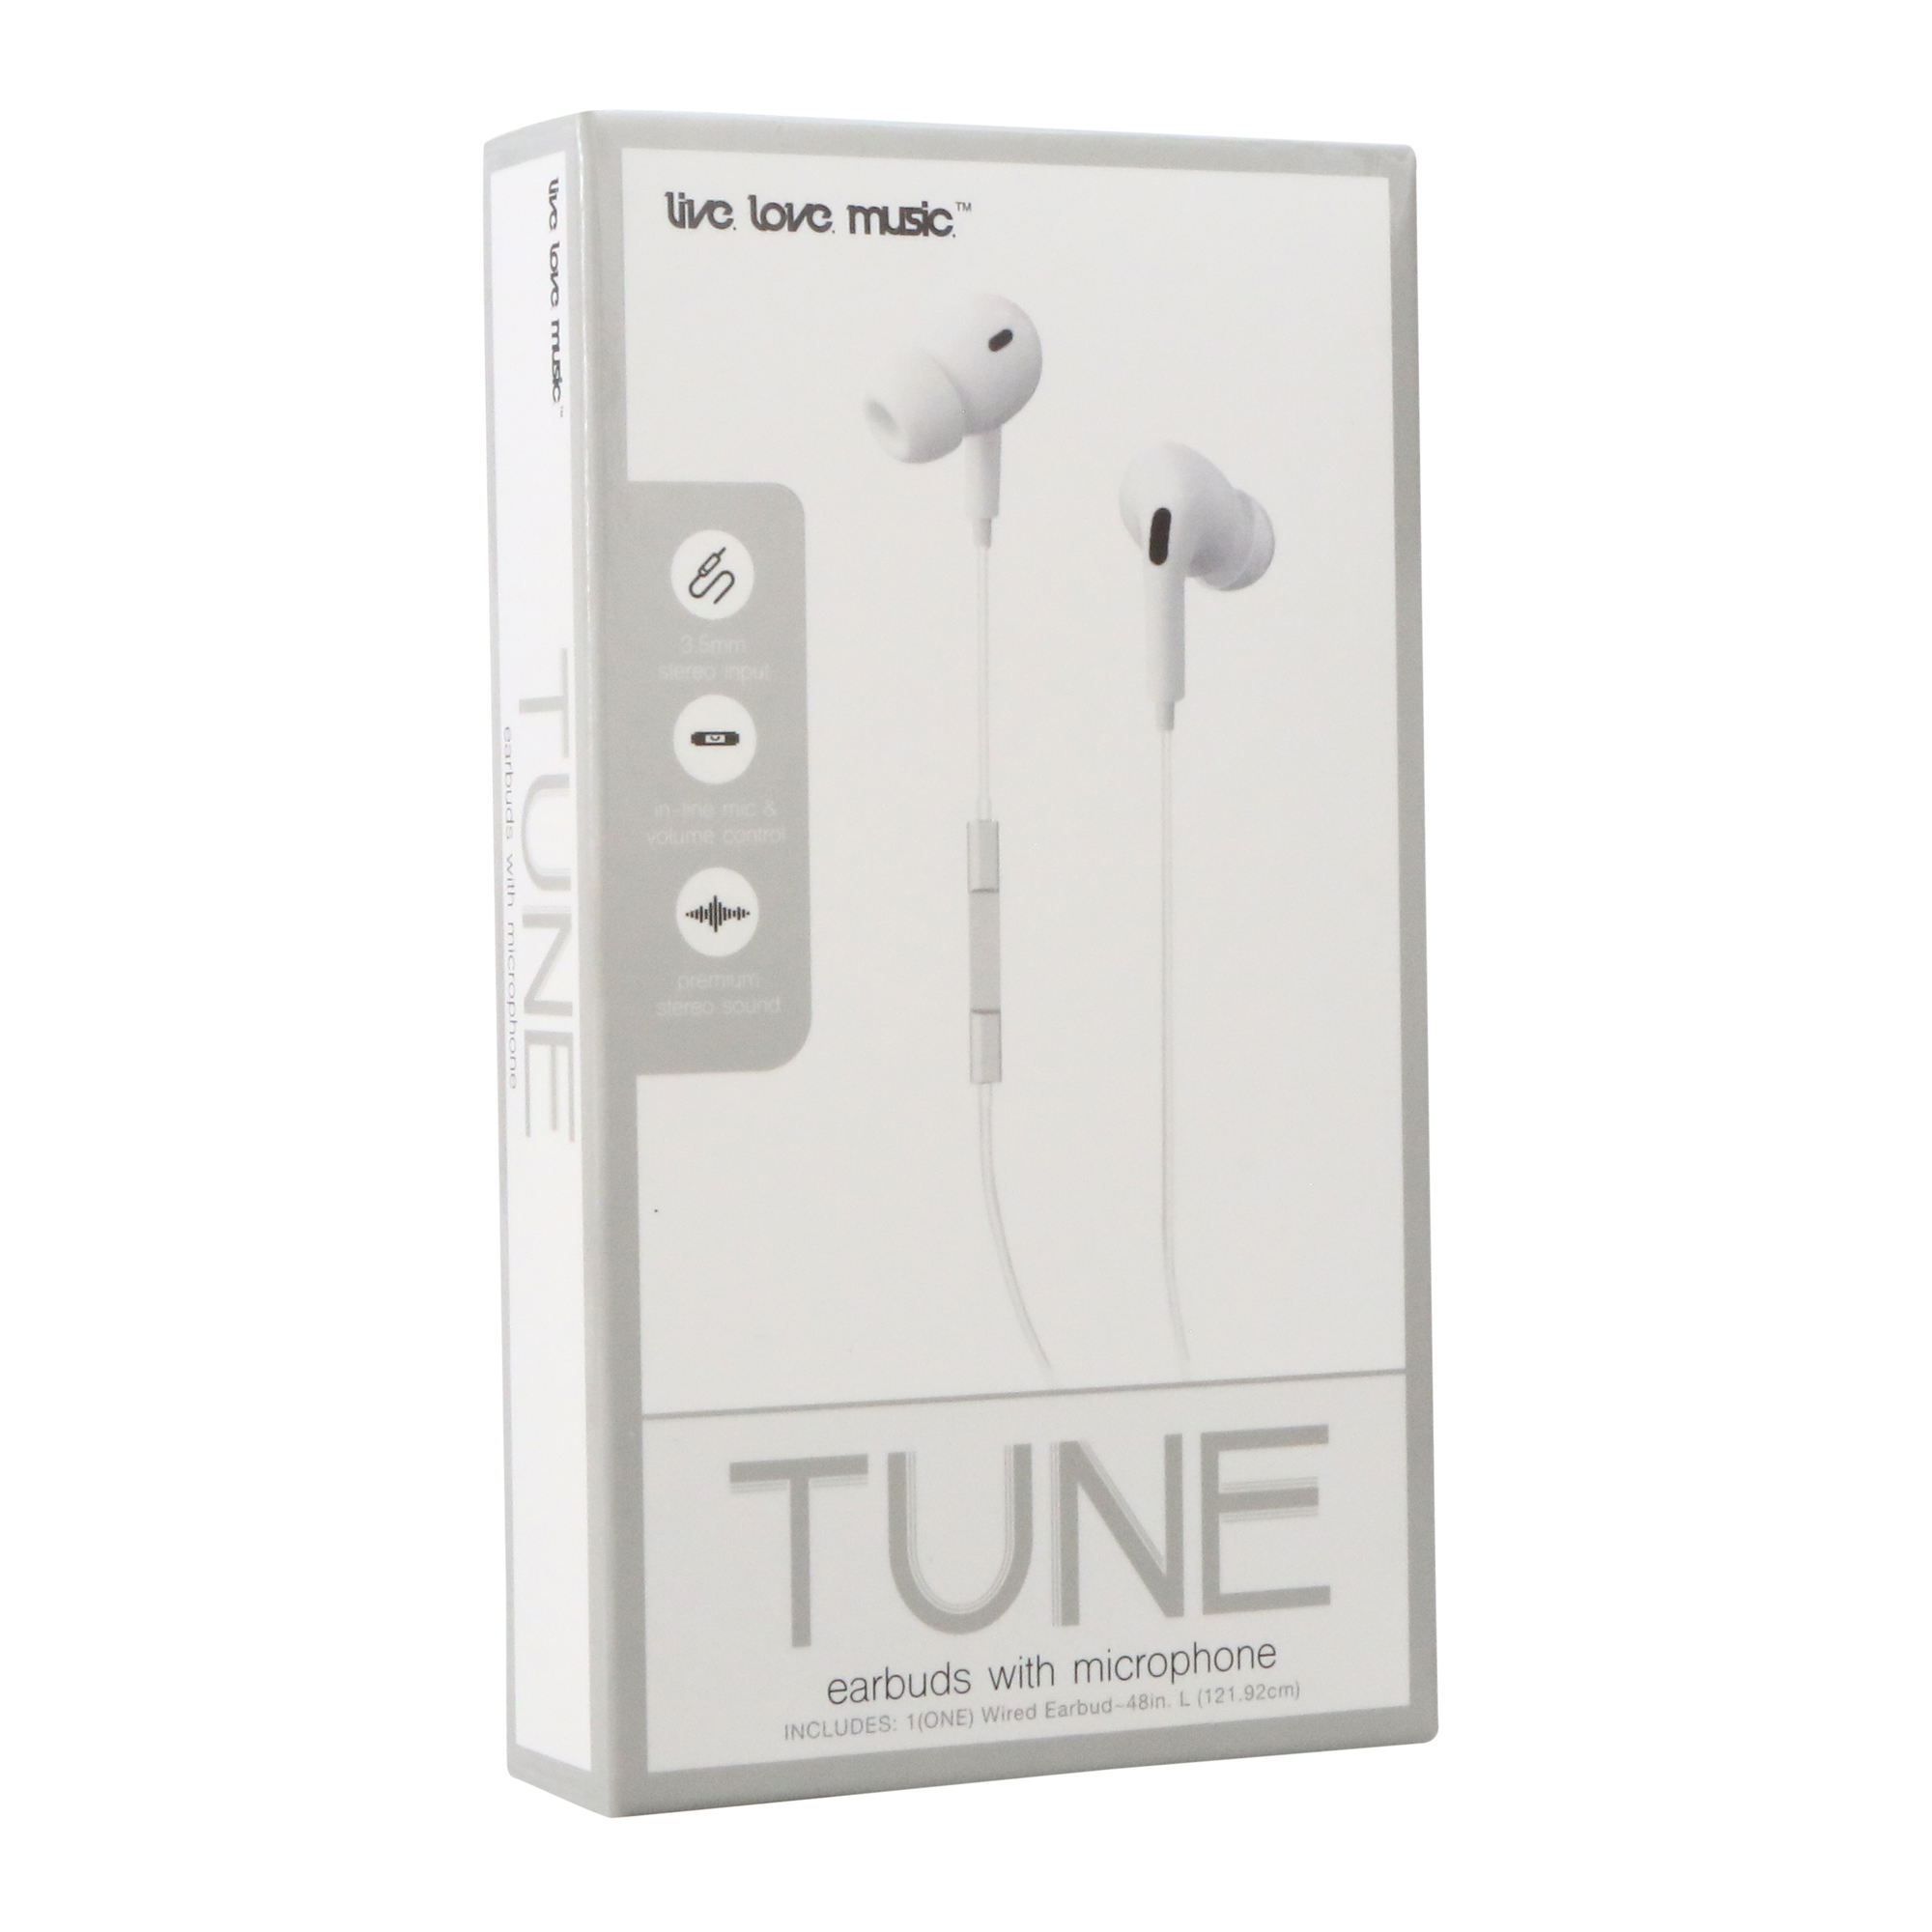 USB Type-C wired earbuds with mic, Five Below